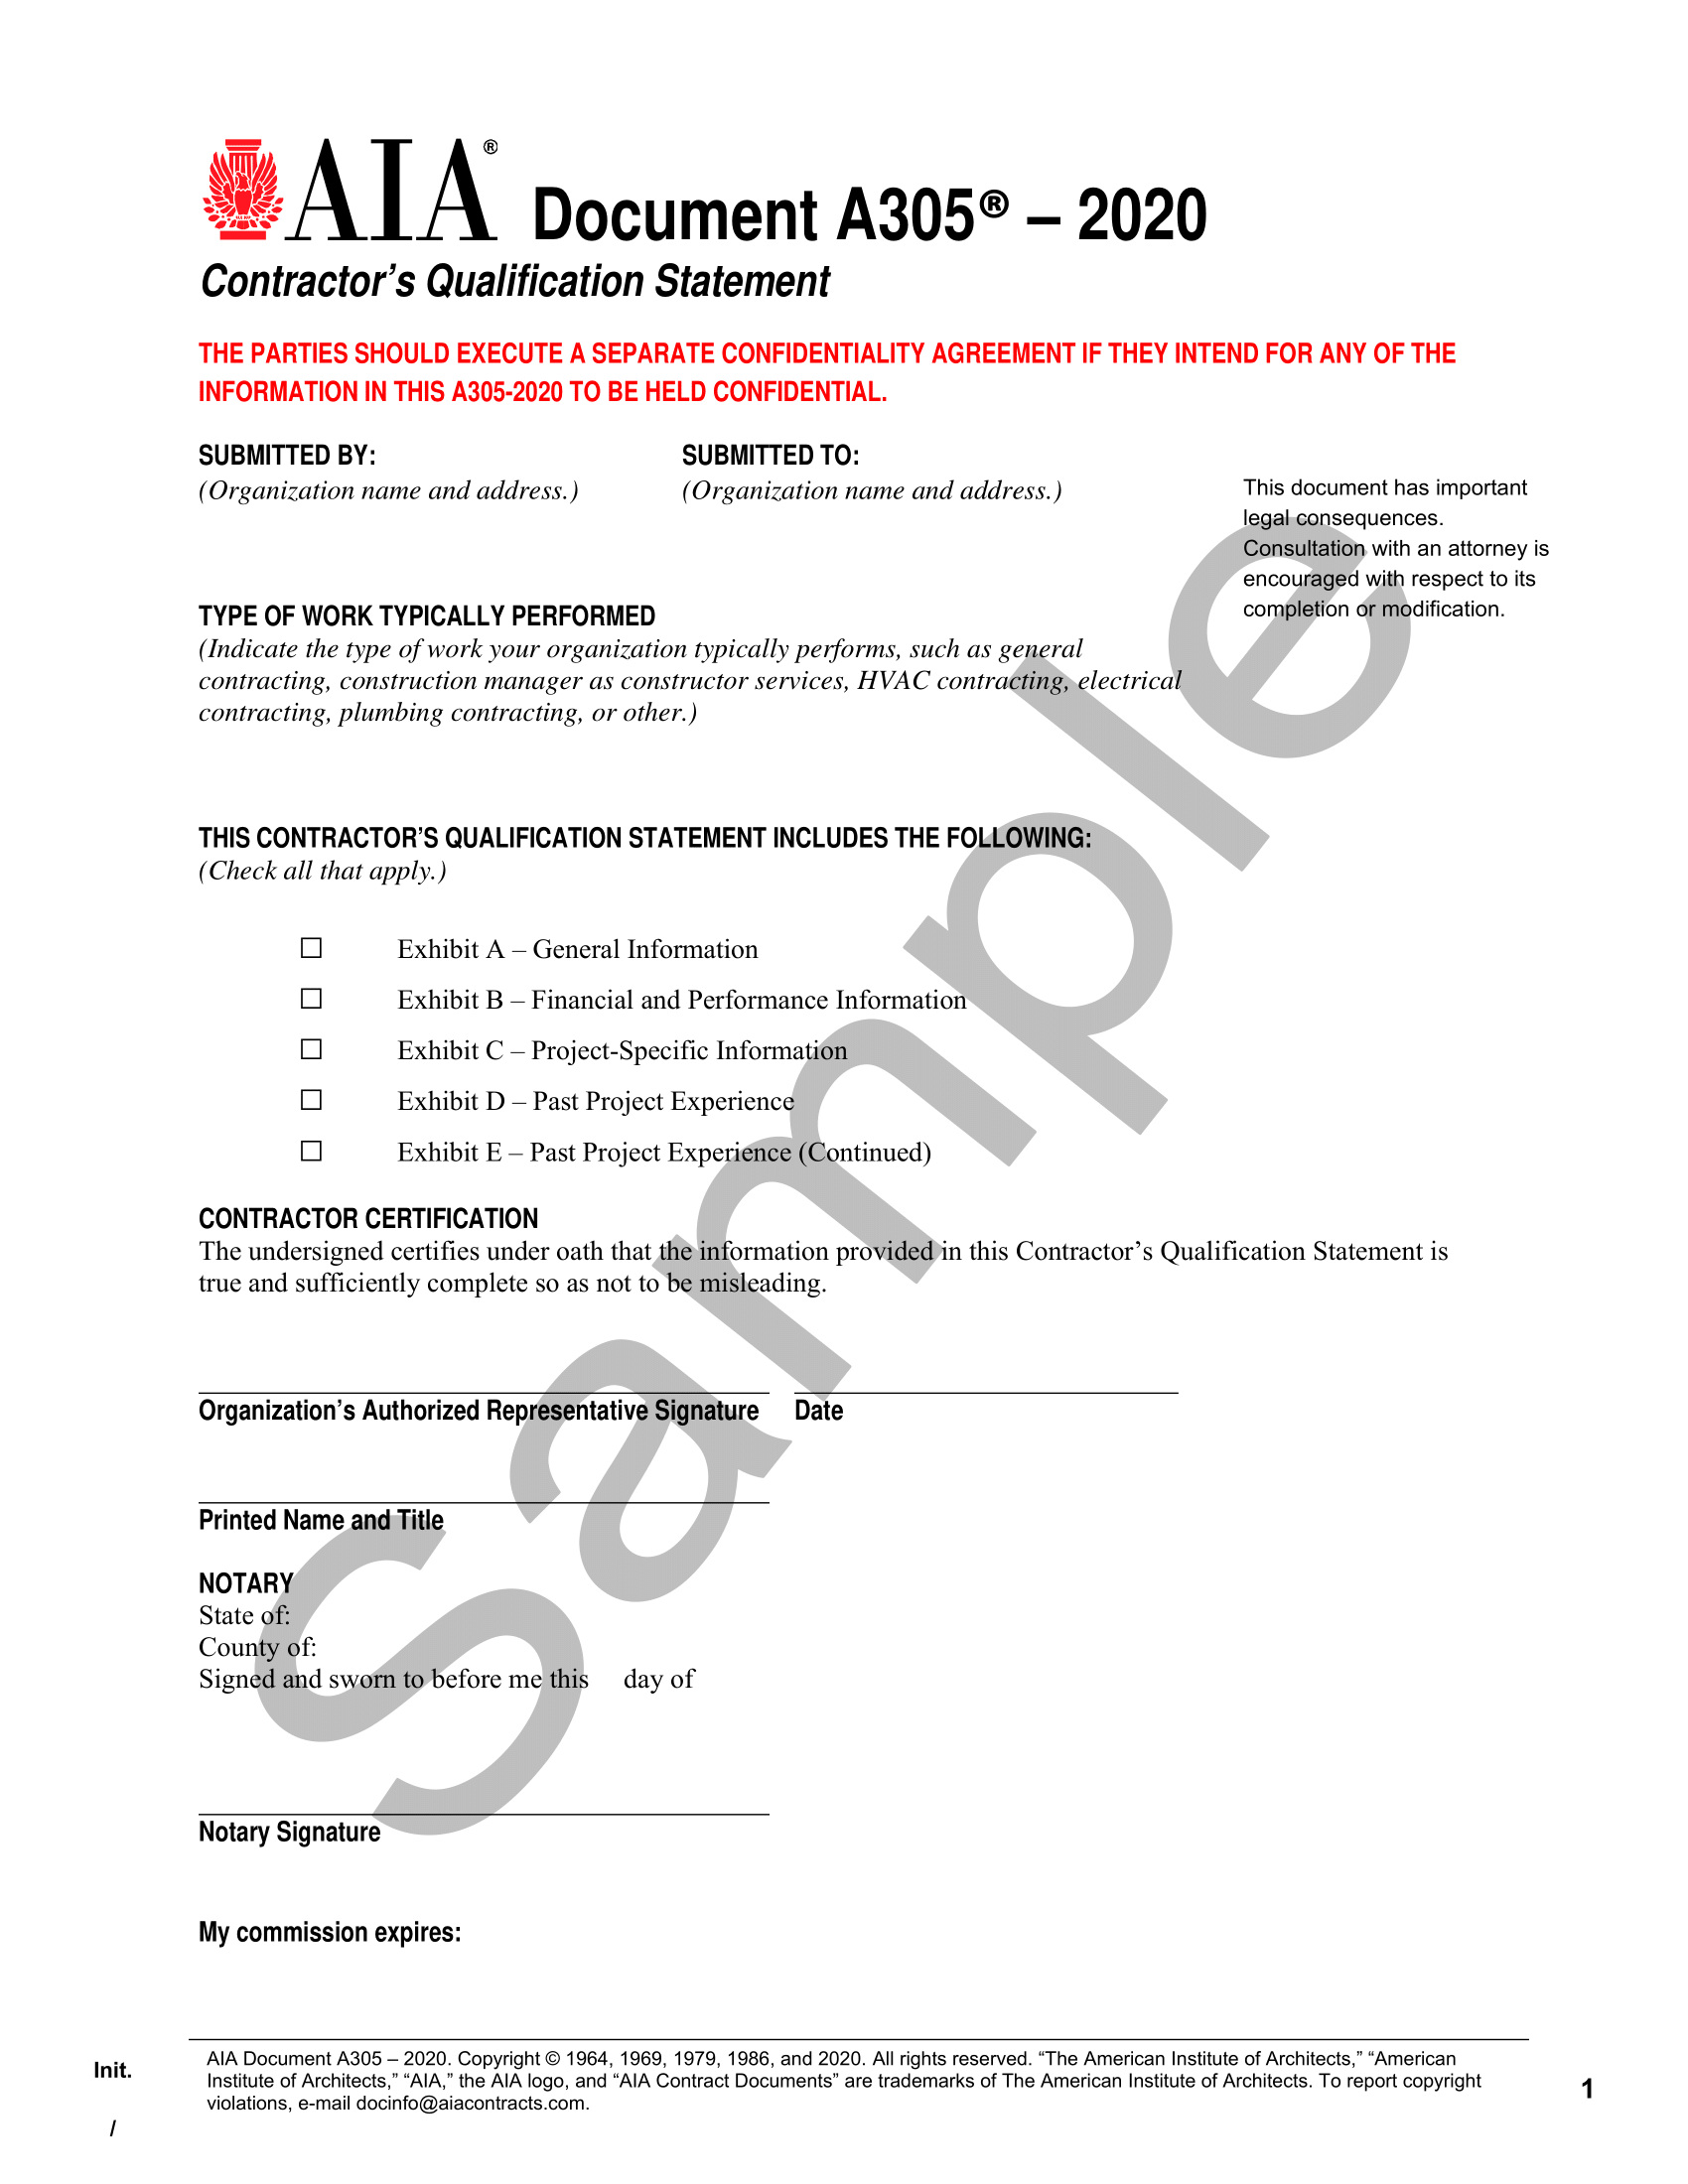 AIA A305 Contractor’s Qualification Statement